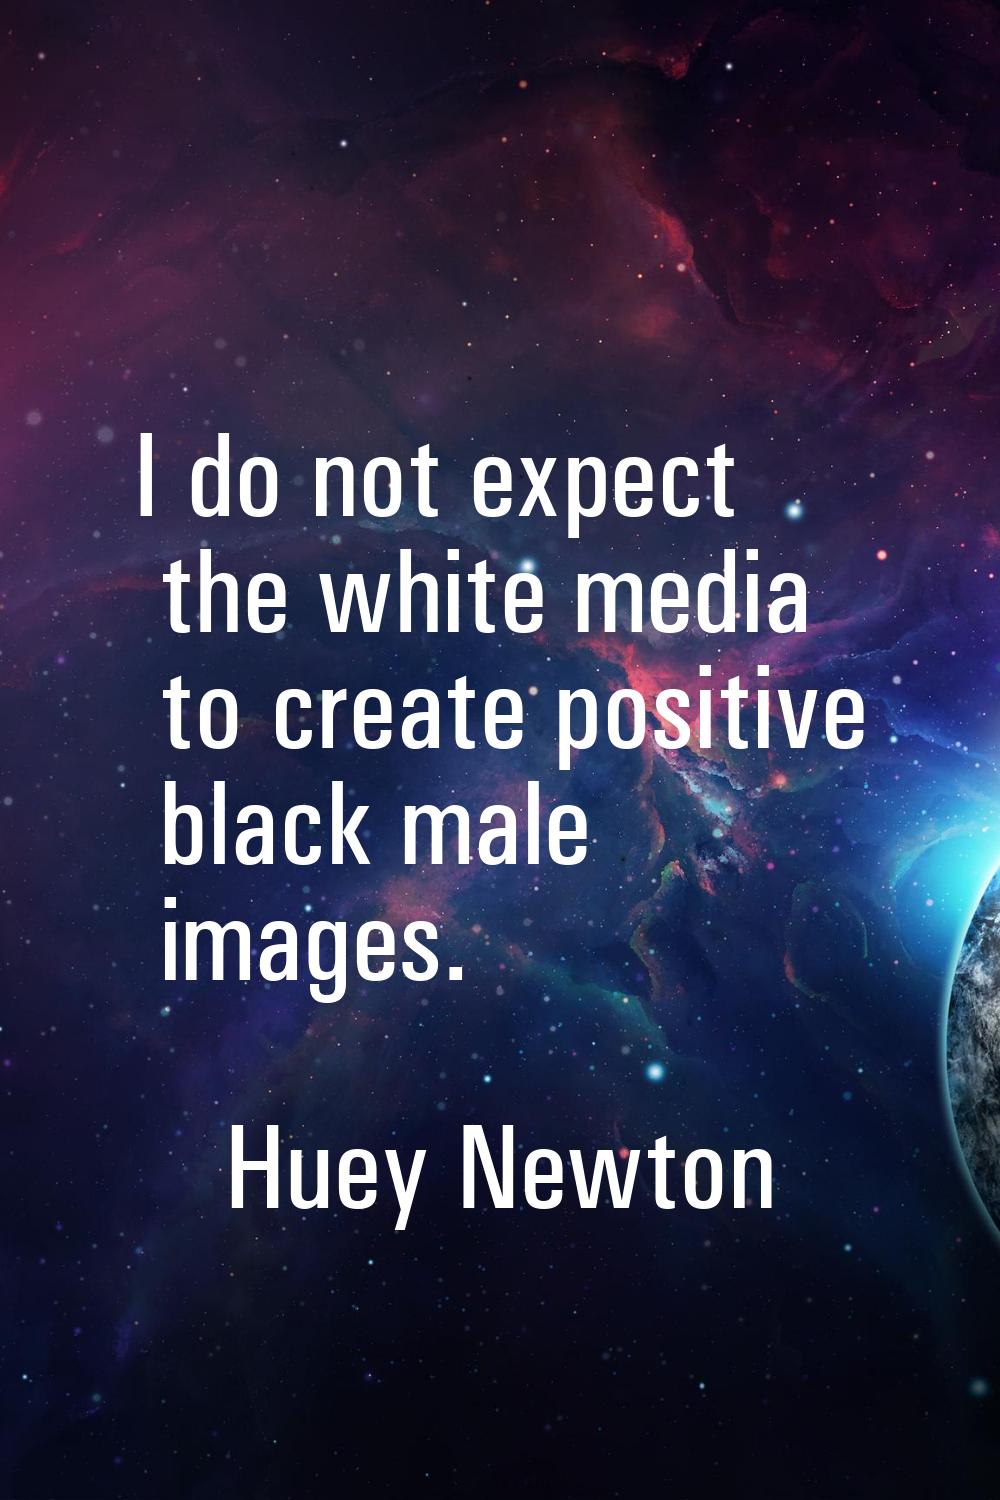 I do not expect the white media to create positive black male images.